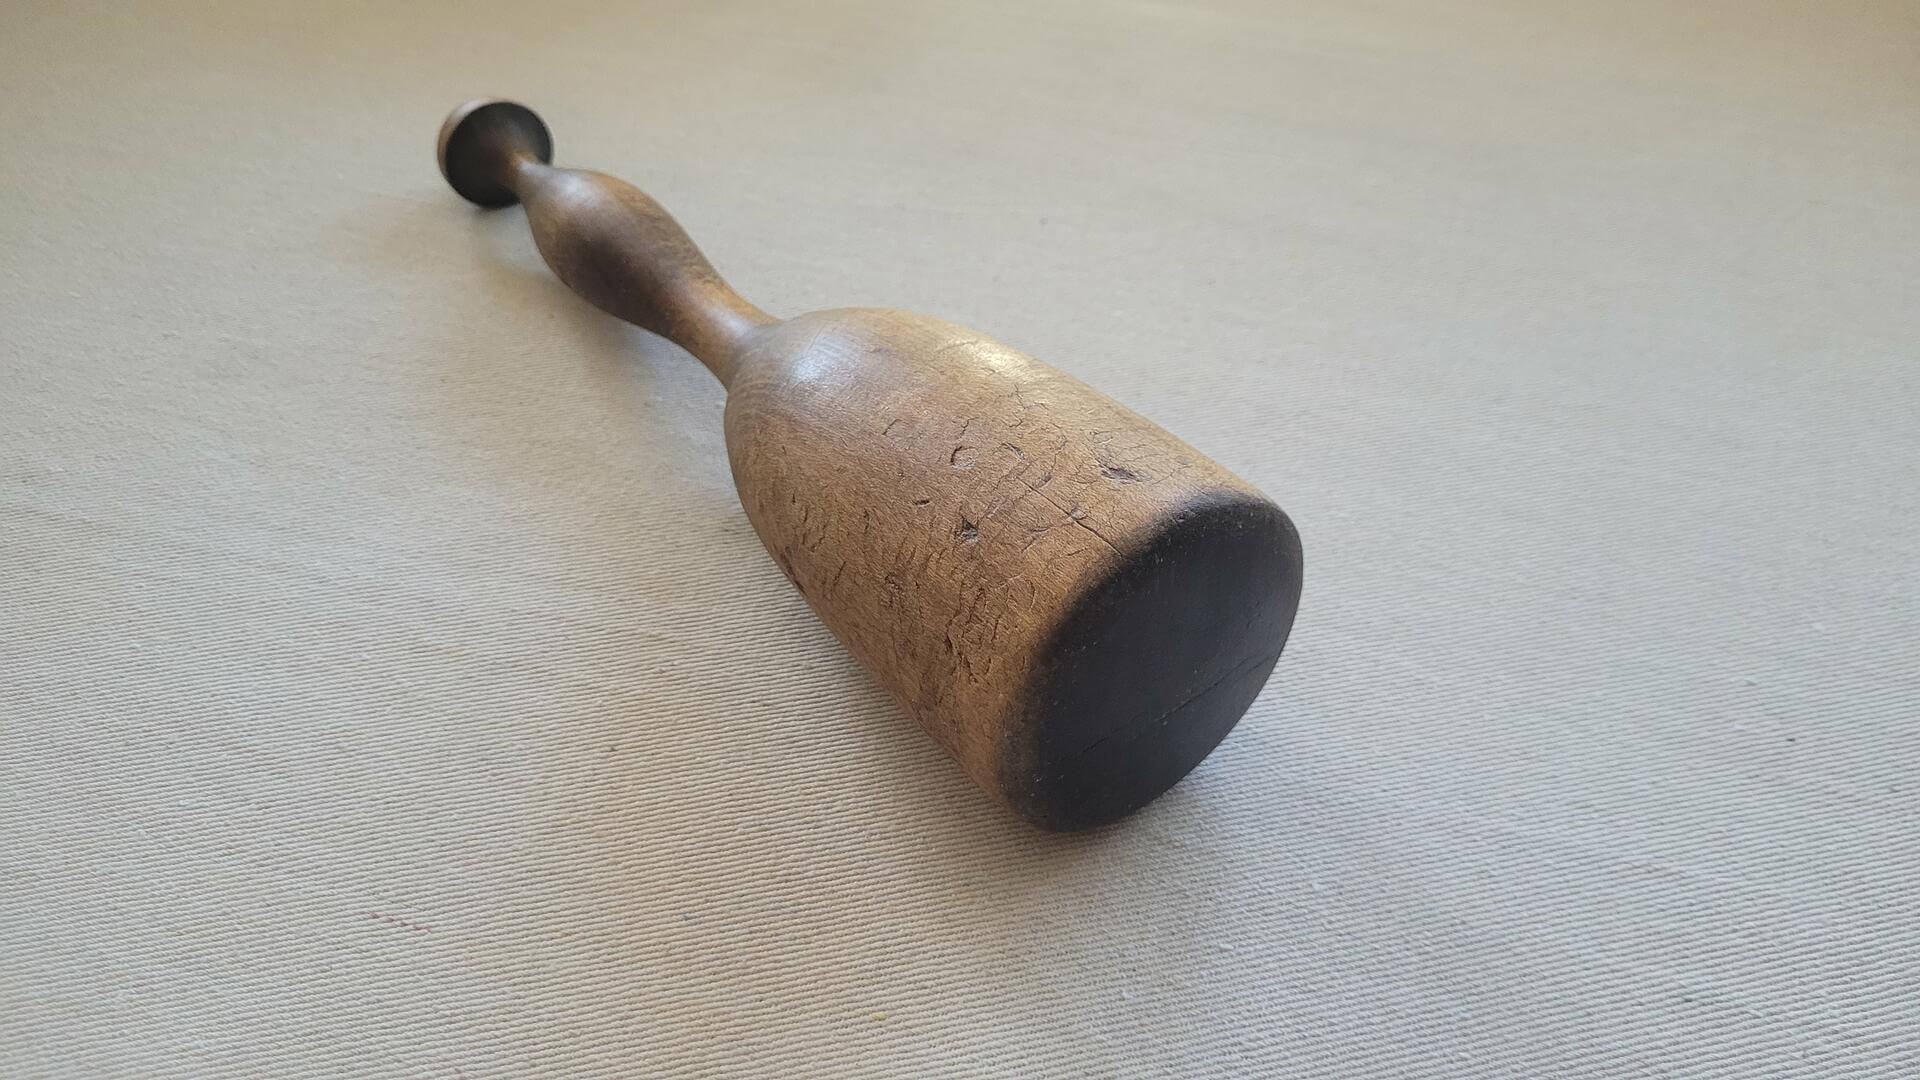 Antique large turned wood pestle, food grinder and crusher. Vintage collectible primitive kitchen wooden mallet and crushing tool